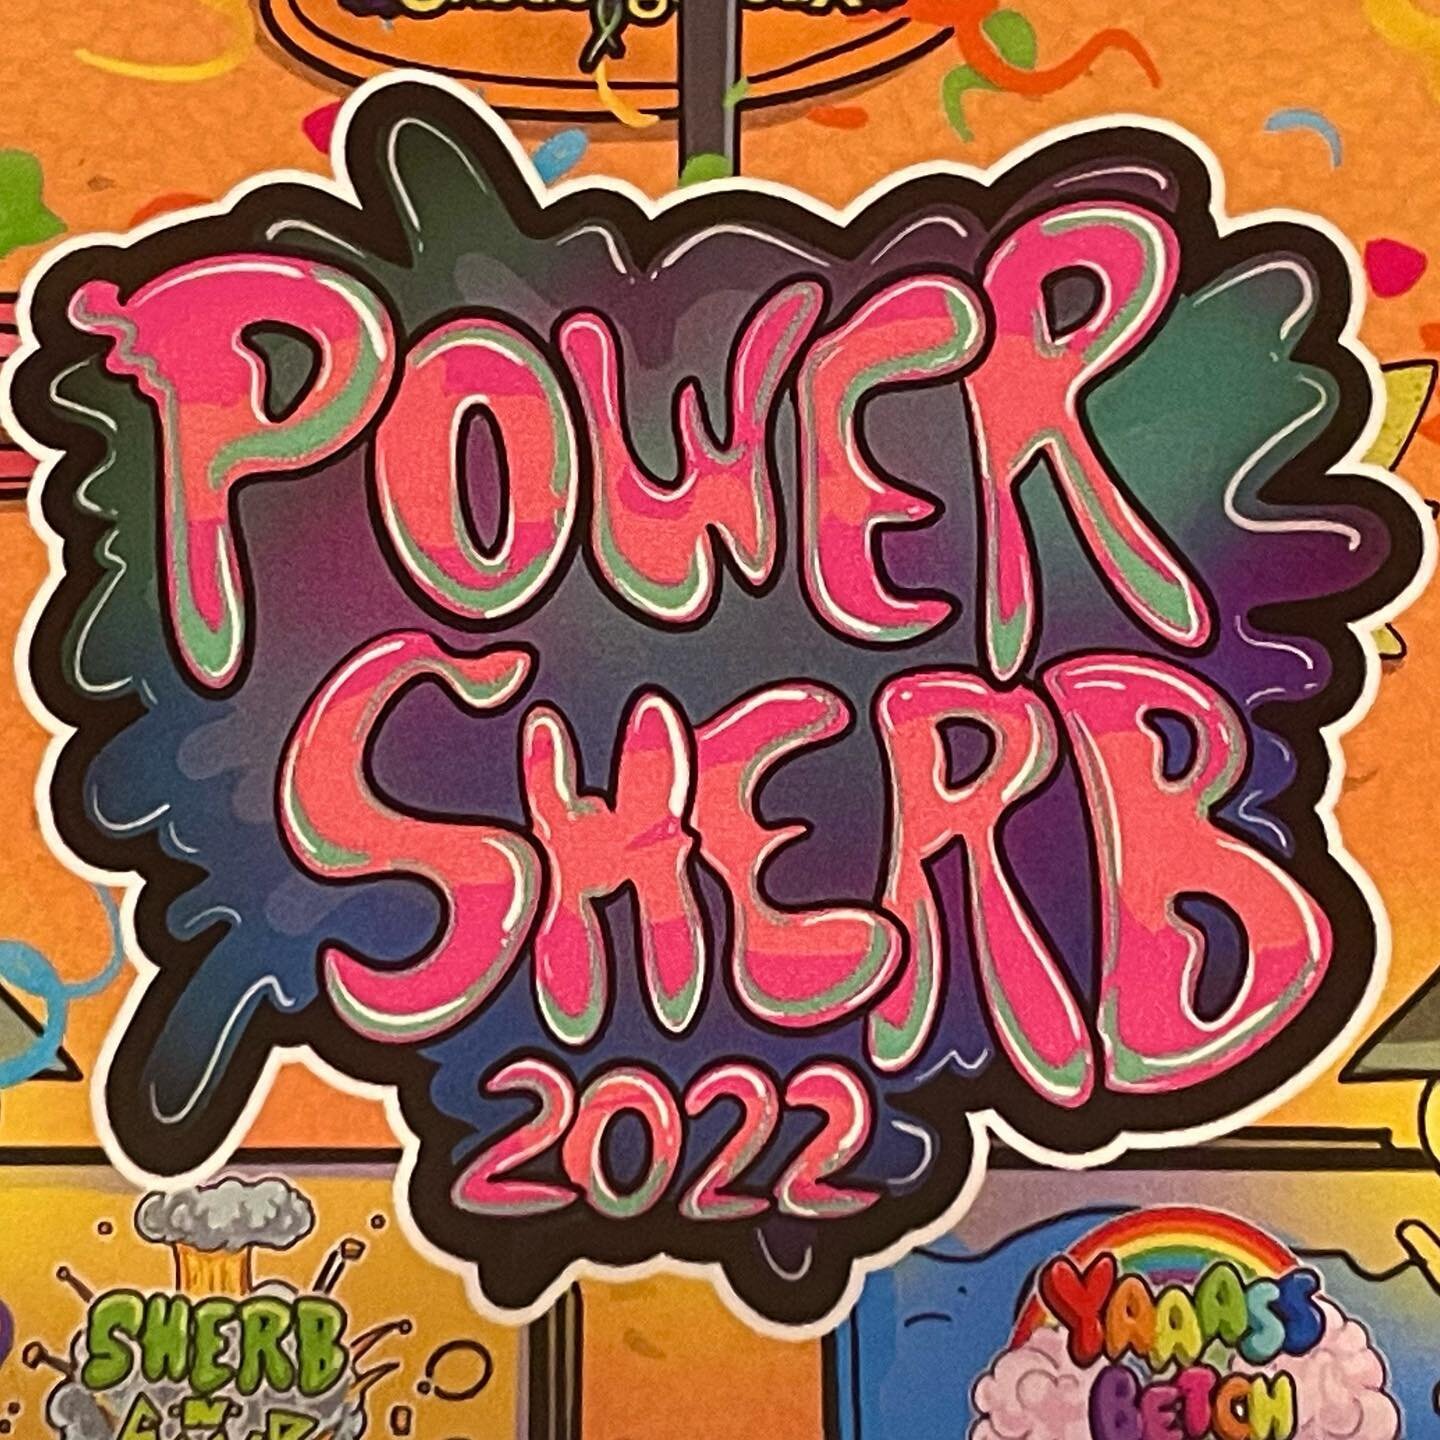 Power Sherb 2022
🍦💥🍦💥🍦💥🍦💥🍦💥

Packs will NOT be sold individually, if you want them you will have to get the whole package deal! These are very limited and will be gone quickly.

🍦💥🍦💥🍦💥🍦💥🍦💥🍦

What will be included in the box: 
1 P